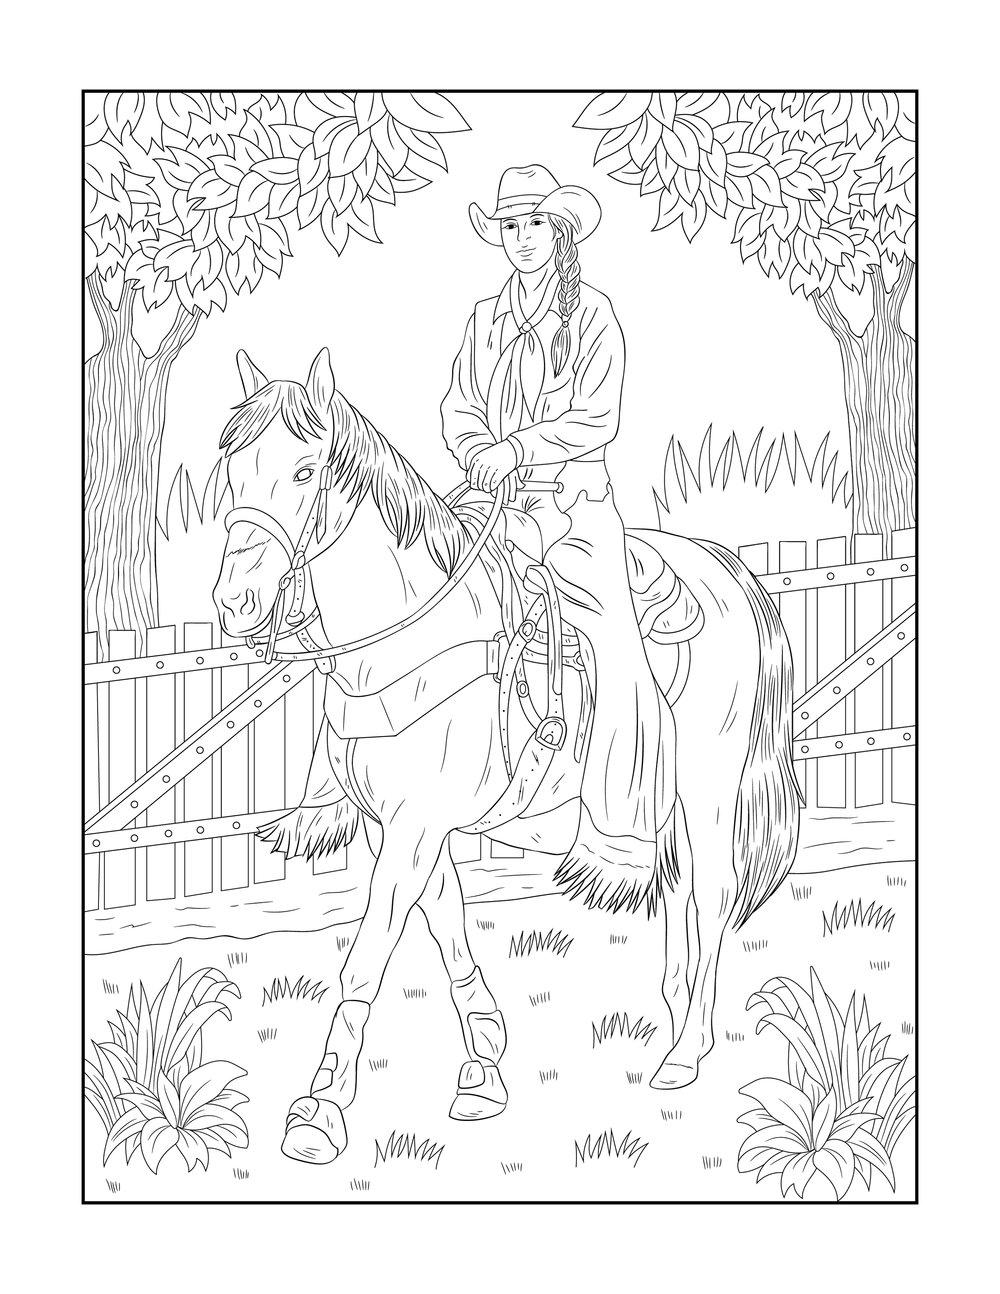 The quarter horse coloring book â willow bend publishing